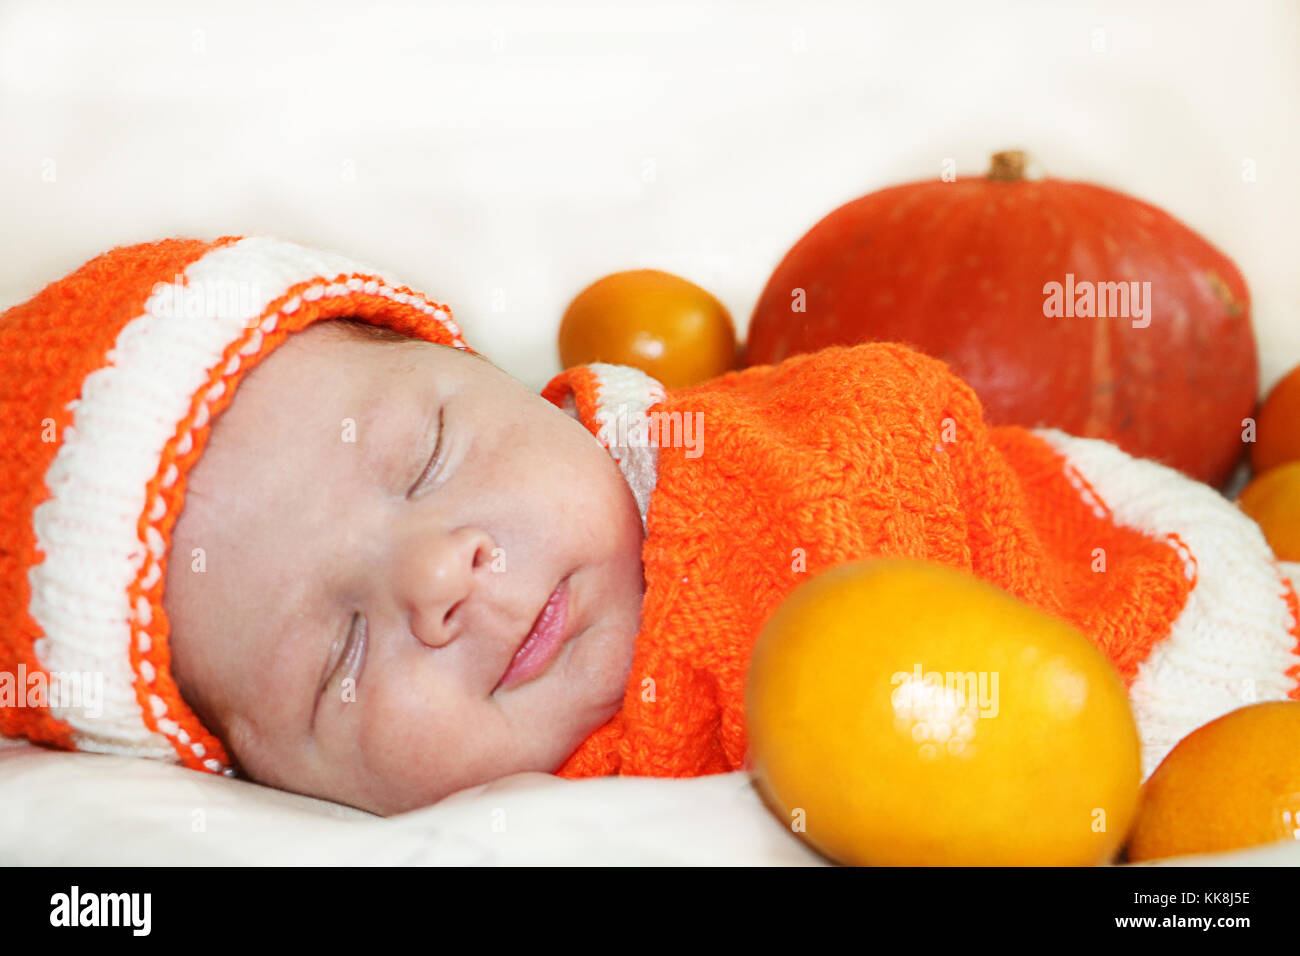 Cute sleeping smiling  newborn baby dressed  in a knitted orange costume with pumpkin and oranges background. Autumn halloween or harvest concept. Smi Stock Photo